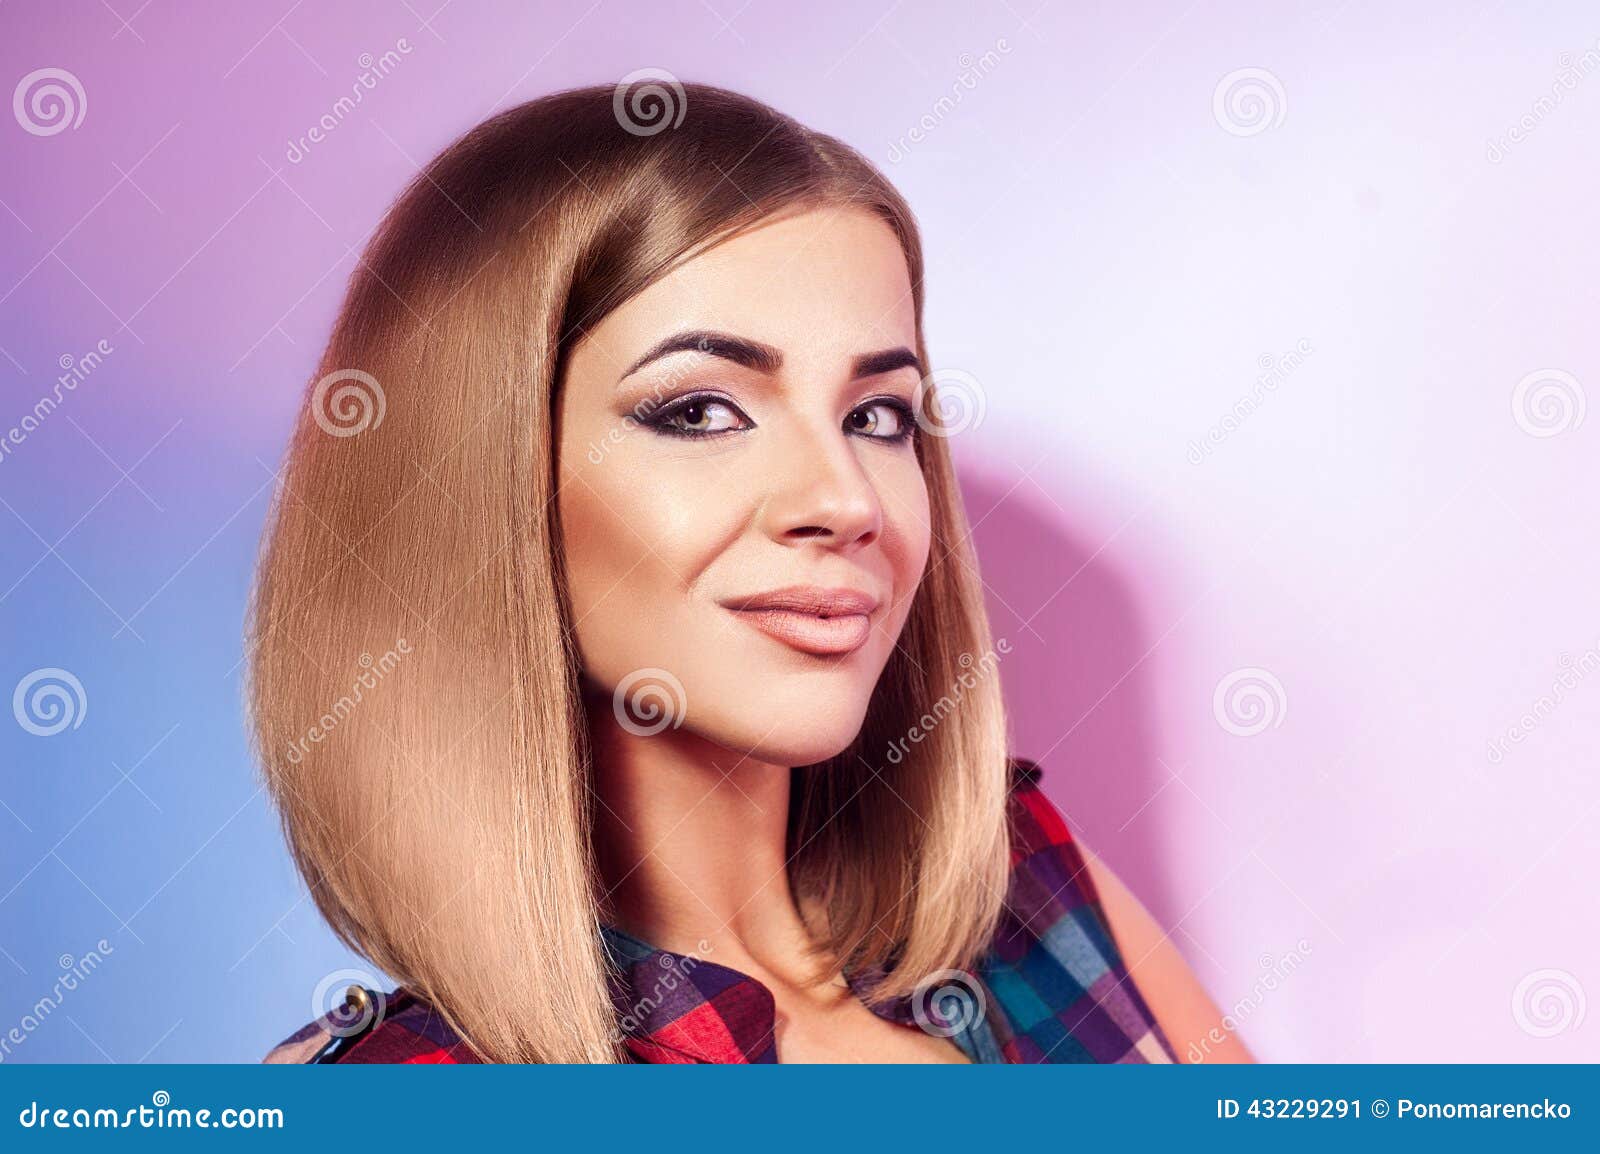 Cutie Caucasian Adult Girl Girl With Short Blond Hair Stock Image Image Of Green Blonde 43229291 